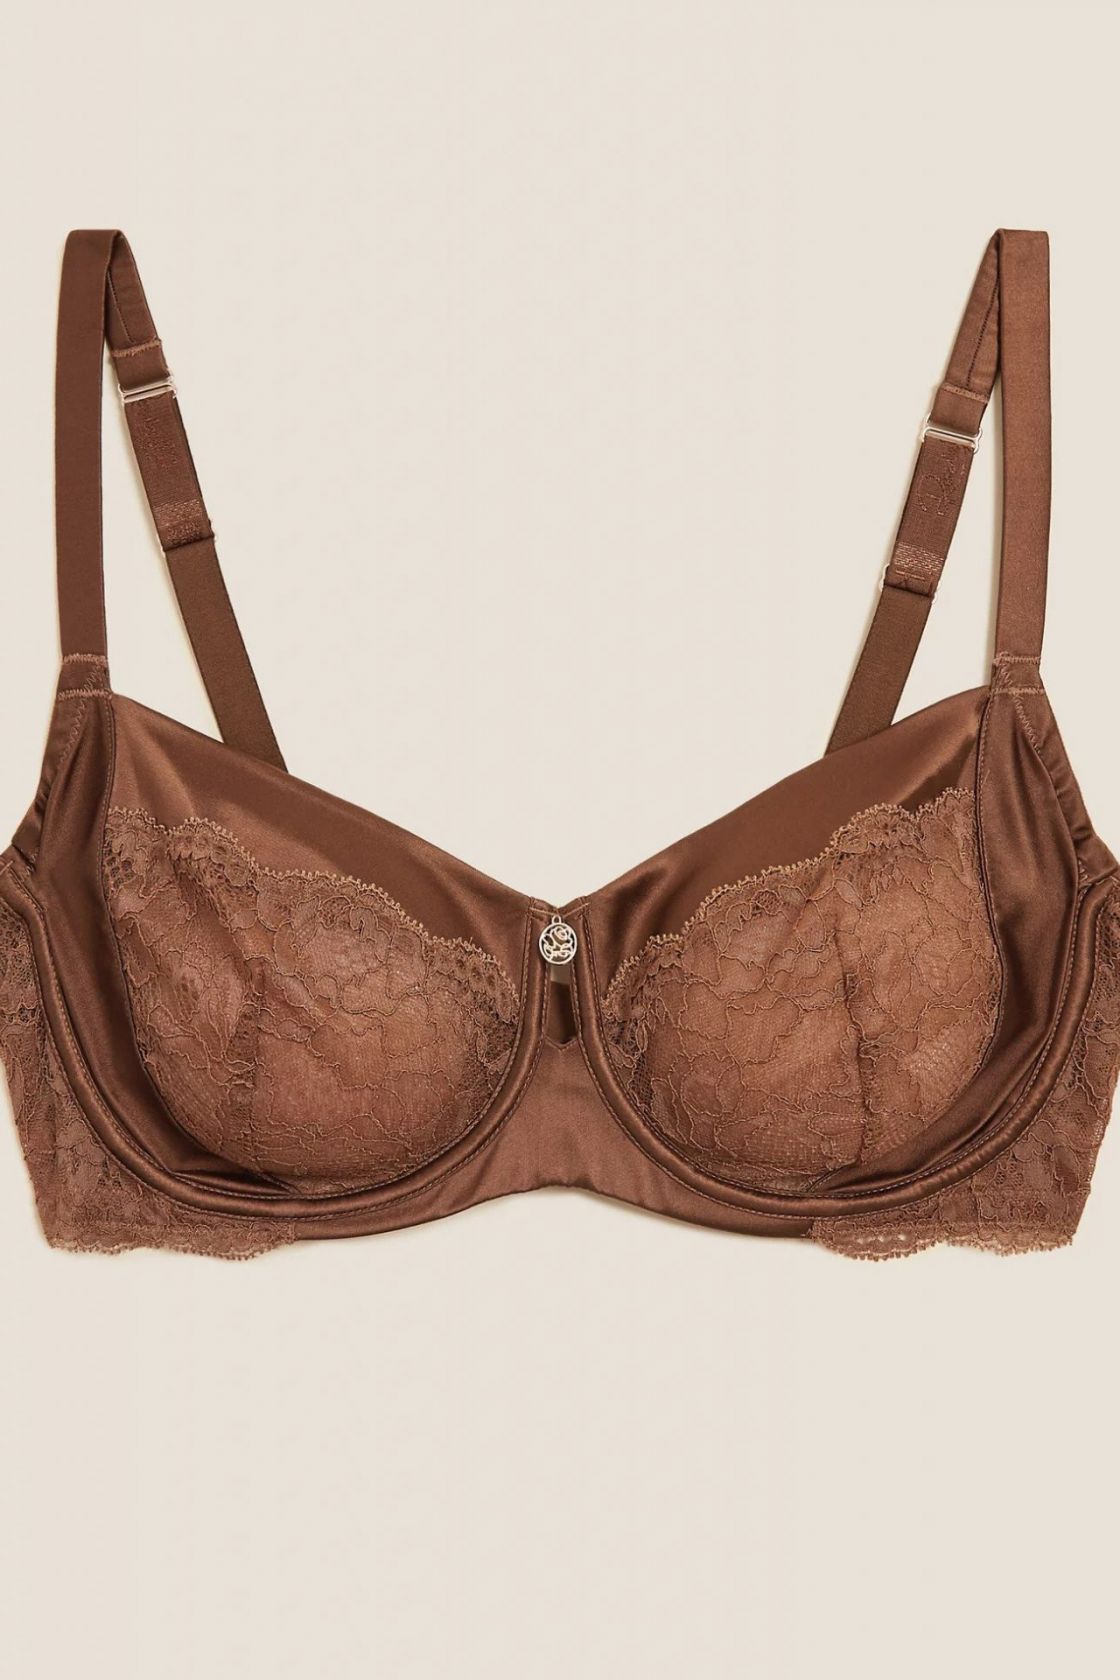 Marks and Spencer Lingerie: the best 15 pieces to shop now